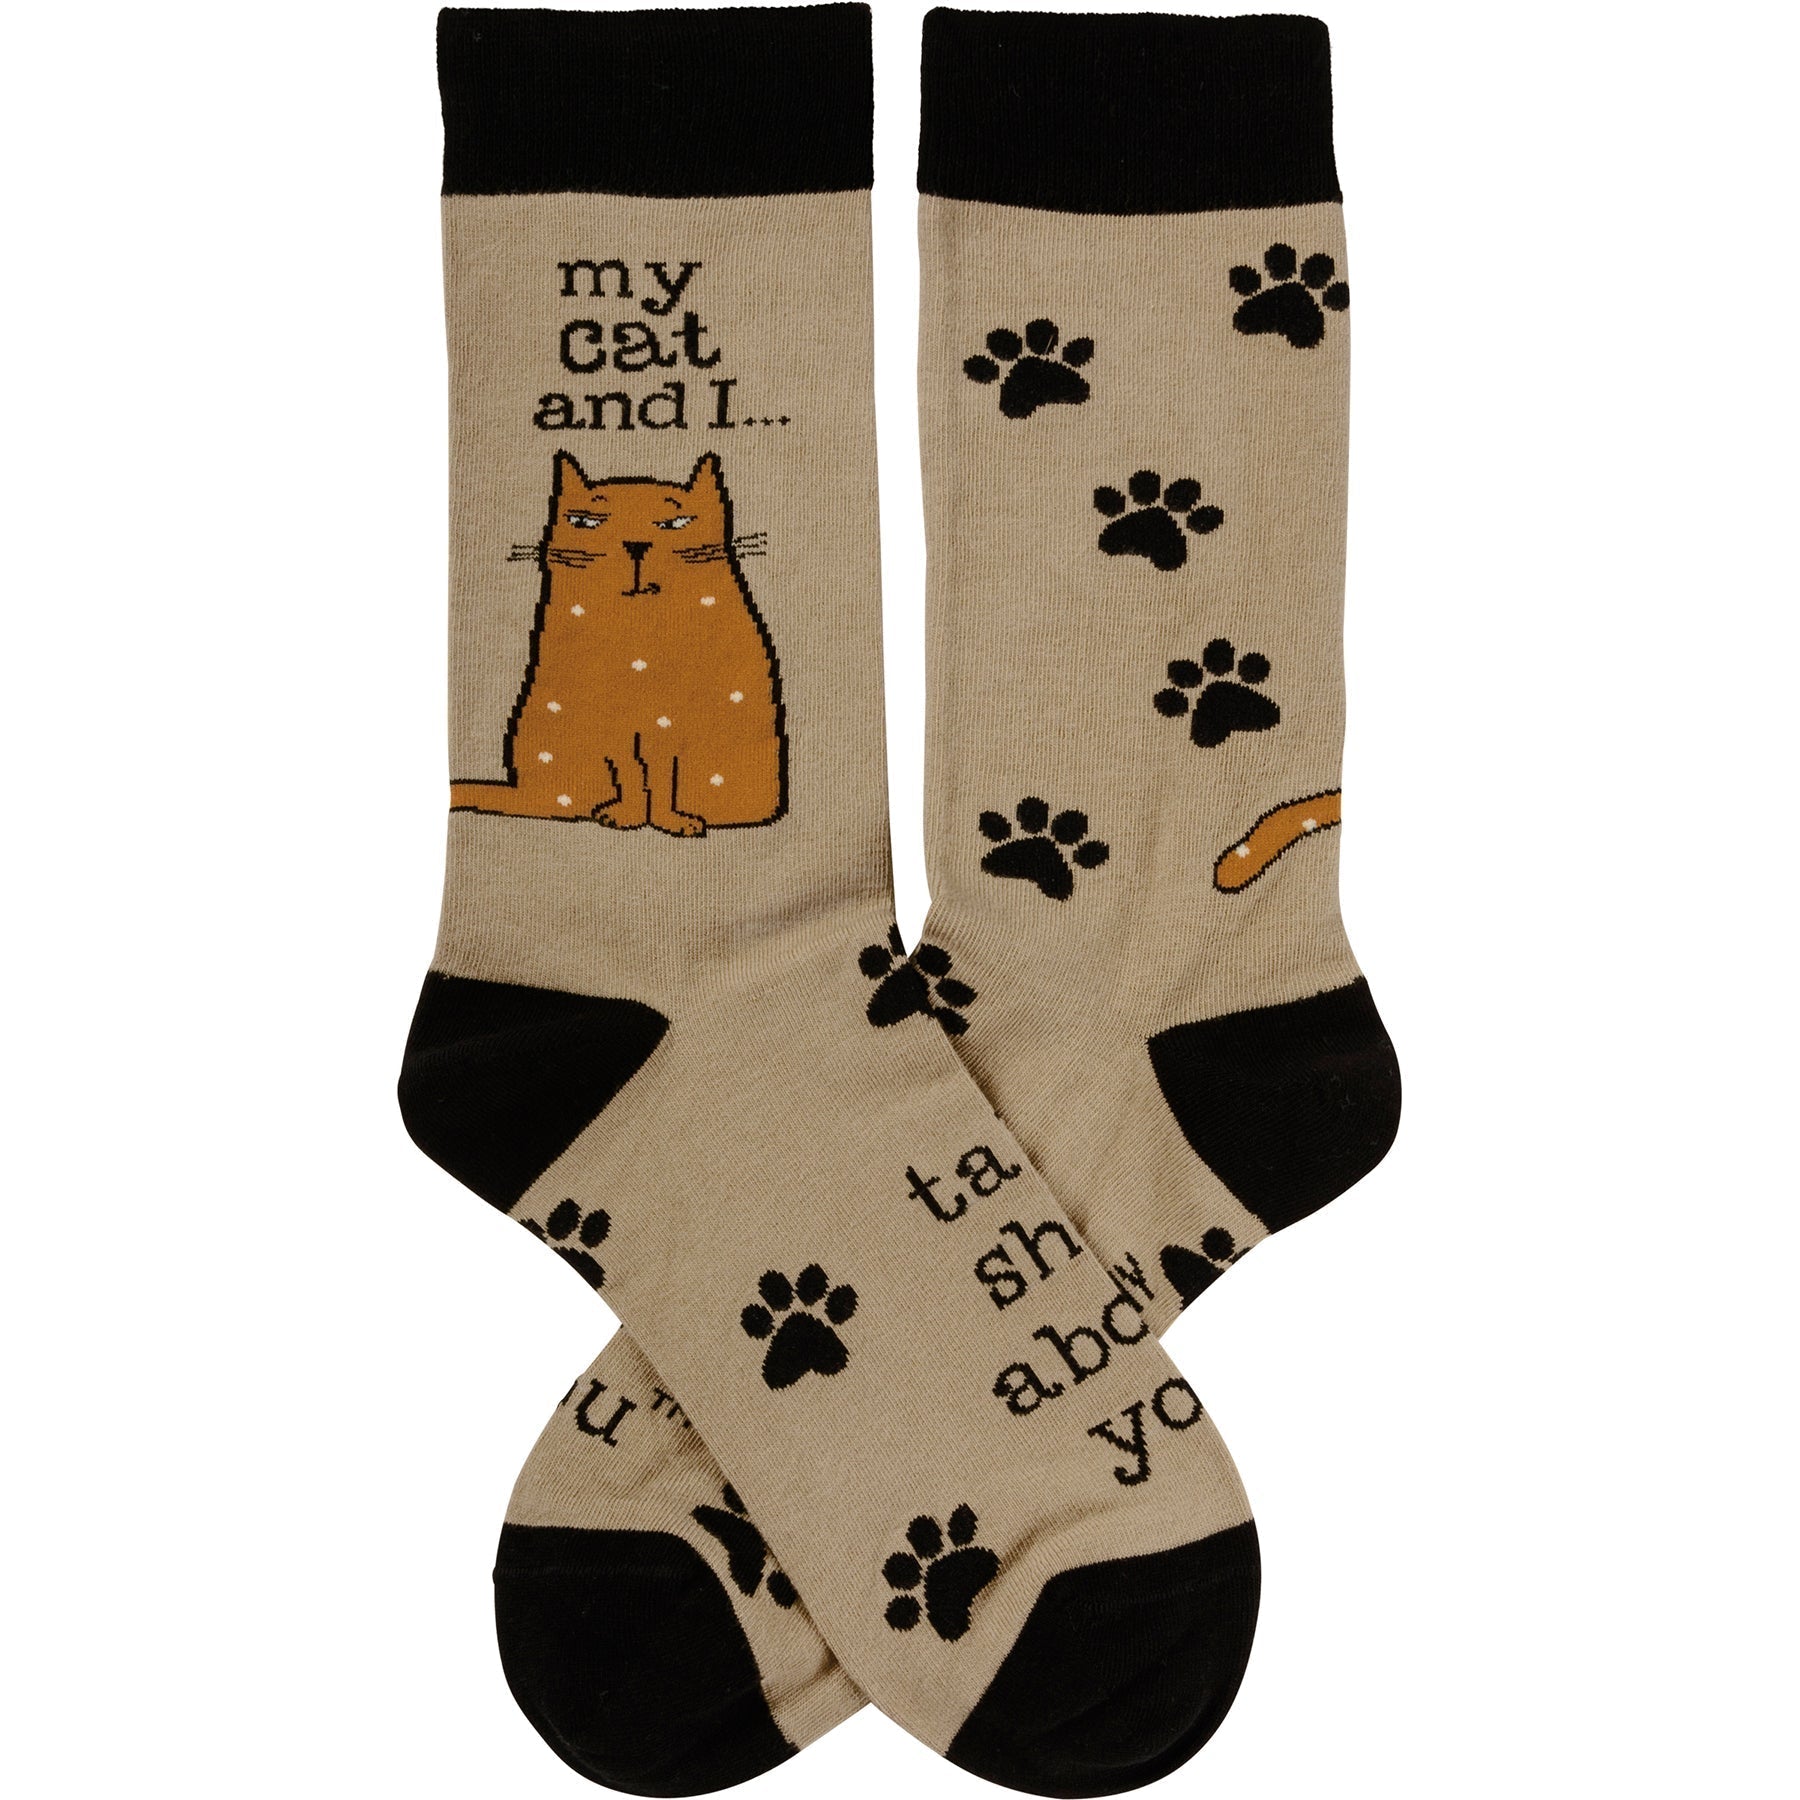 Cat Themed Socks With My Cat And I Talk S**t About You And Paw Print Printed  On Cotton Fabric